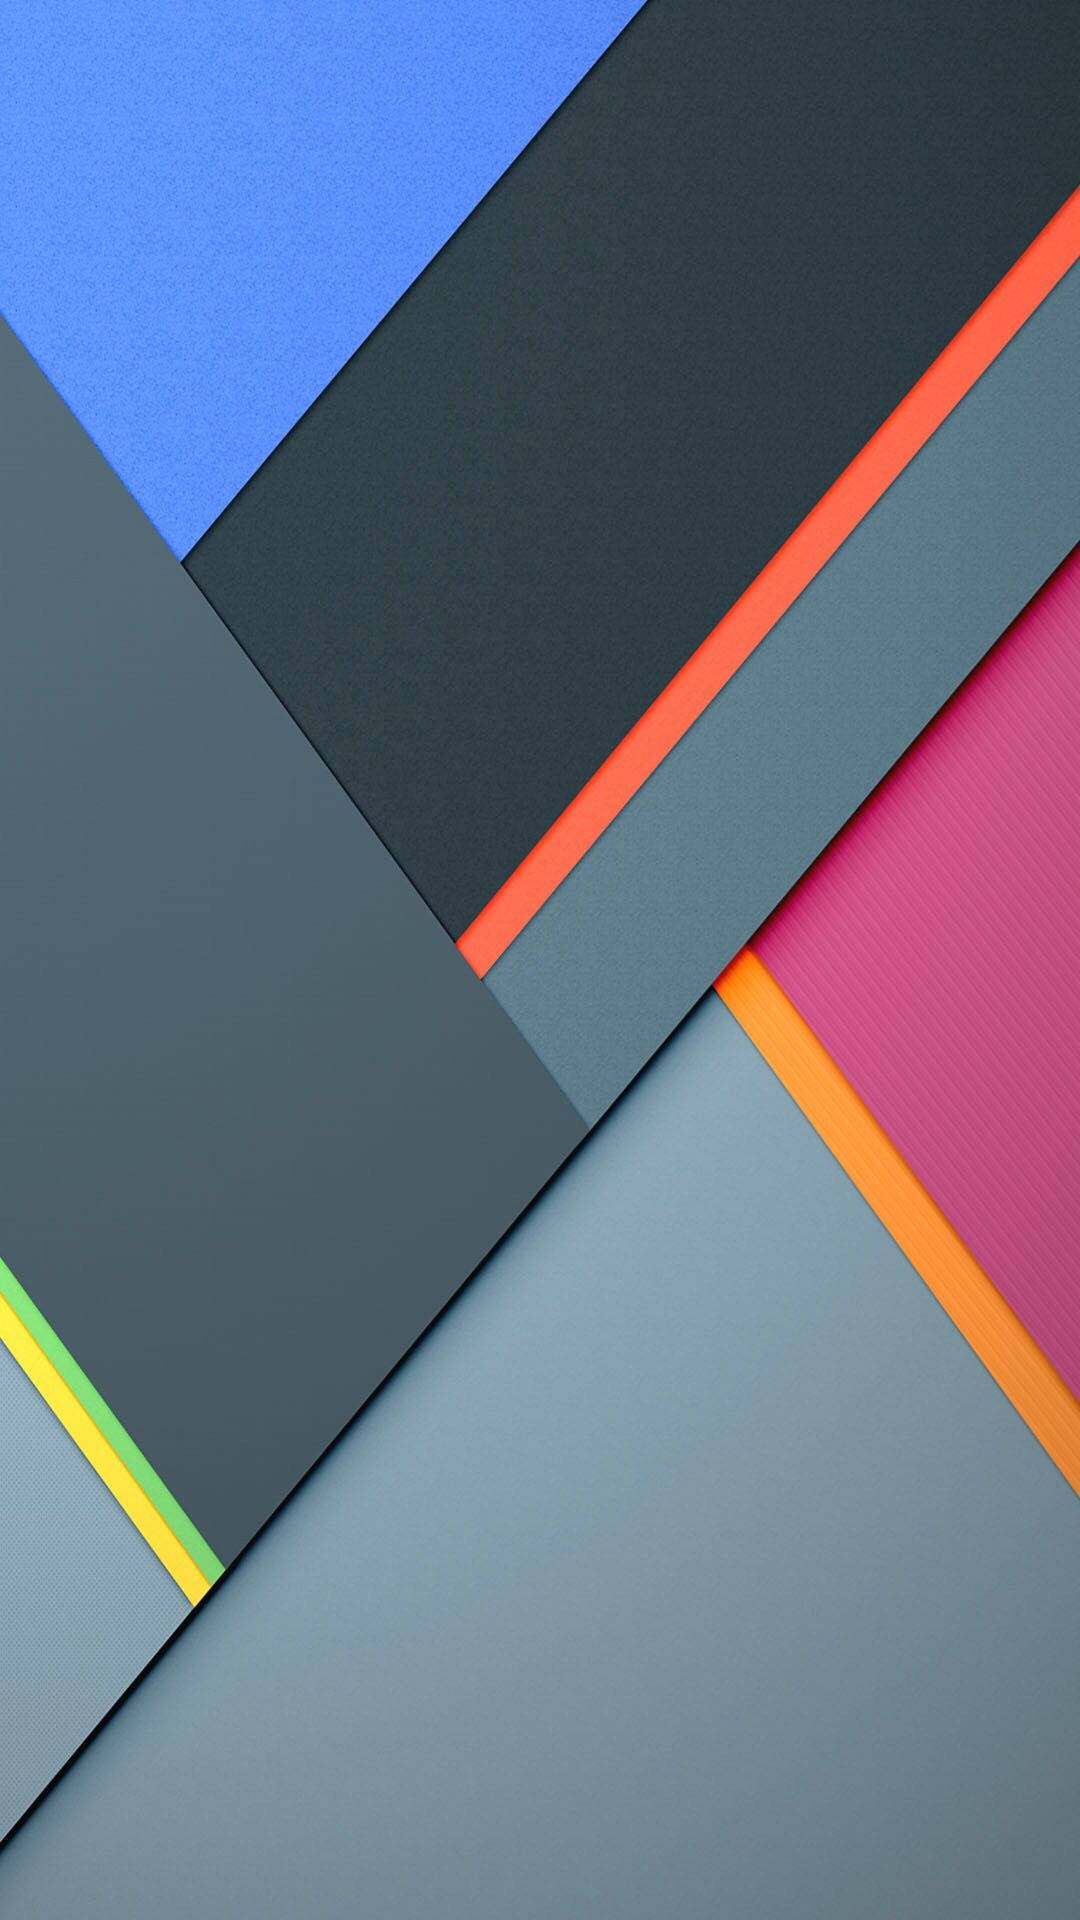 Simple Gray And Lines Geometric Phone Wallpaper